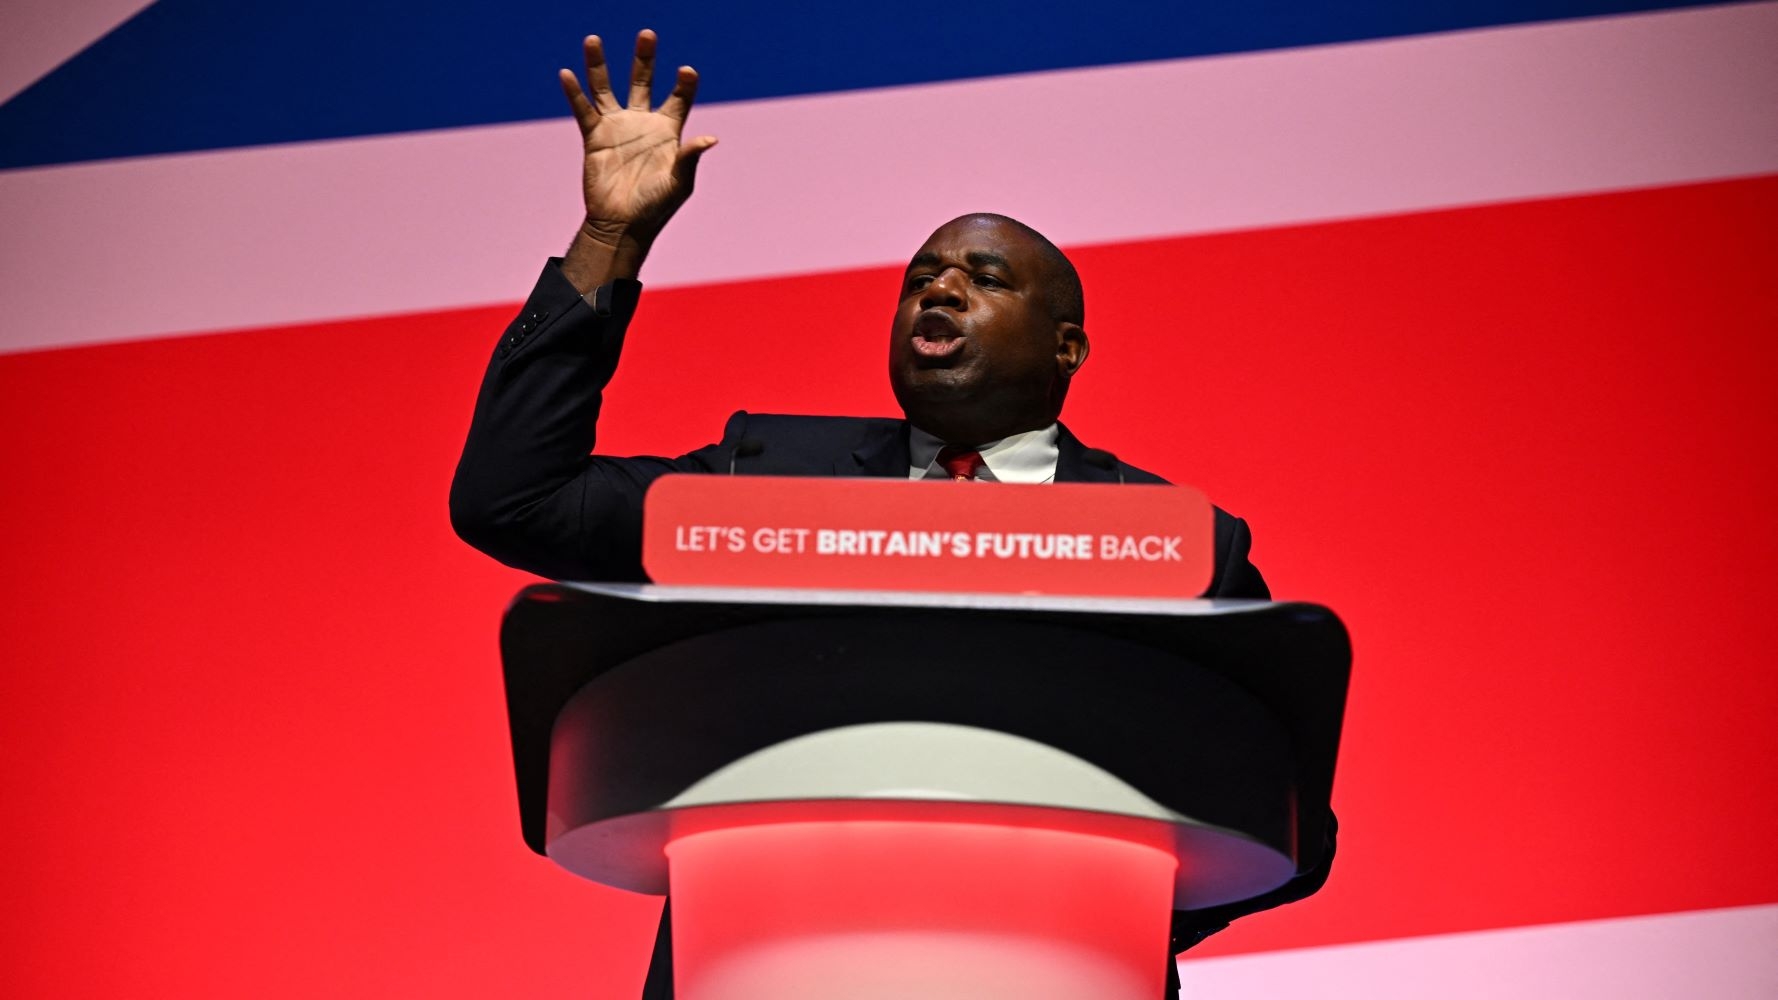 Labour's David Lammy warned the Conservative government against undermining international law (Paul Ellis/AFP)